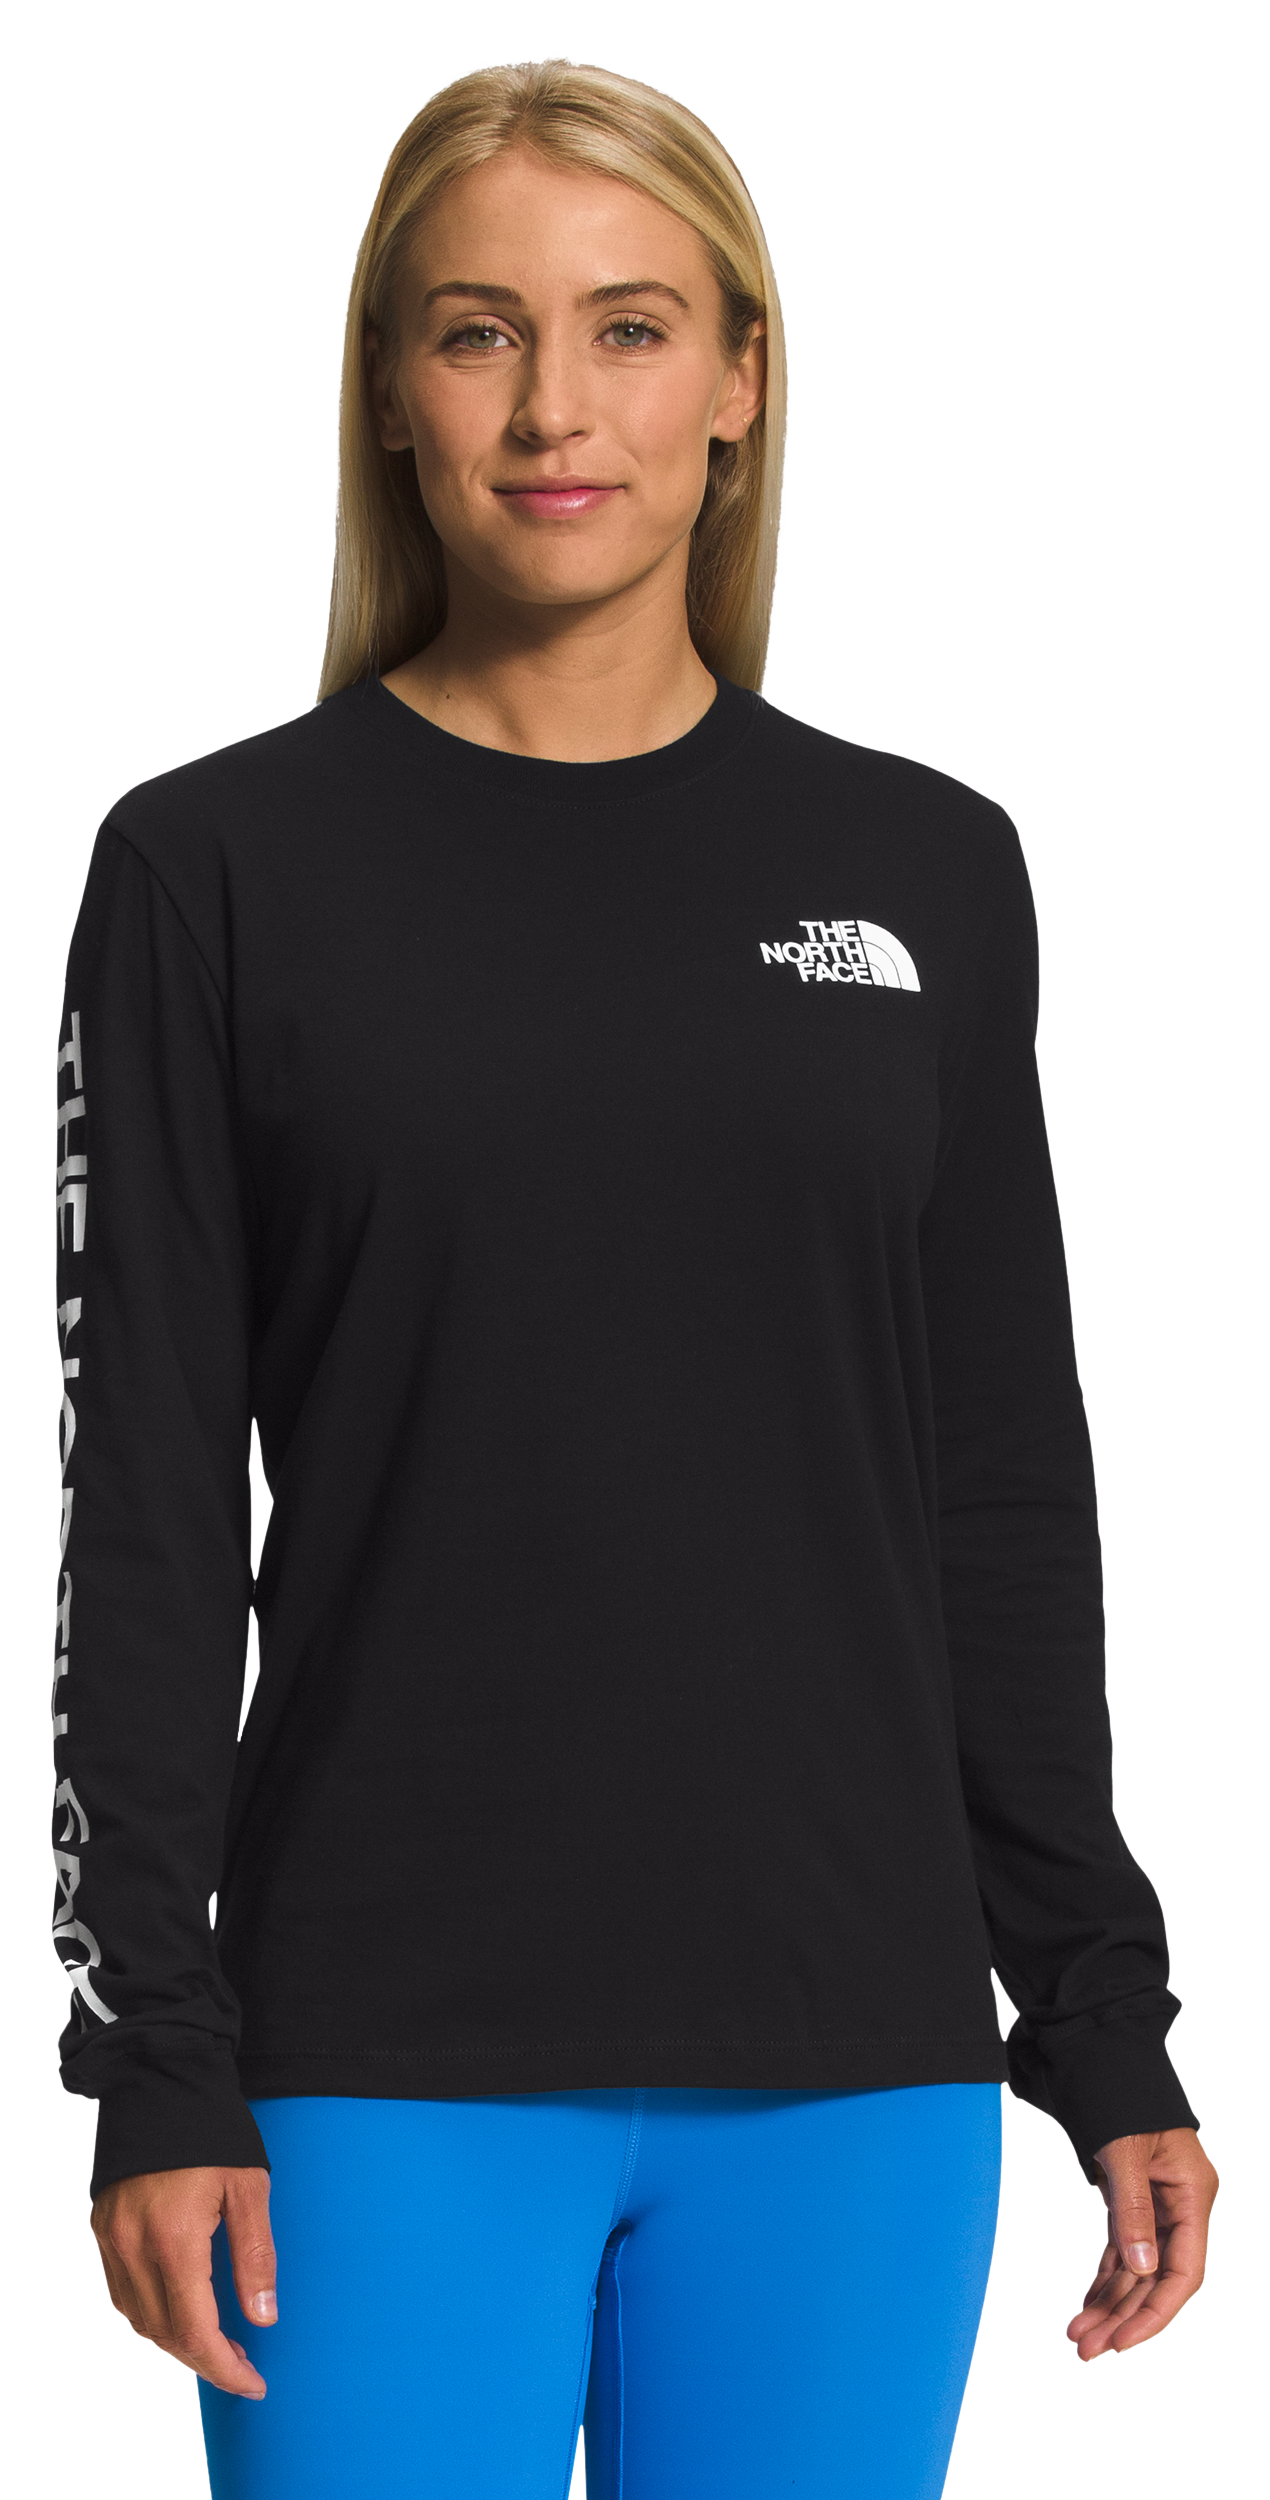 The North Face Hit Graphic Long-Sleeve T-Shirt for Ladies - TNF Black/TNF White - XL